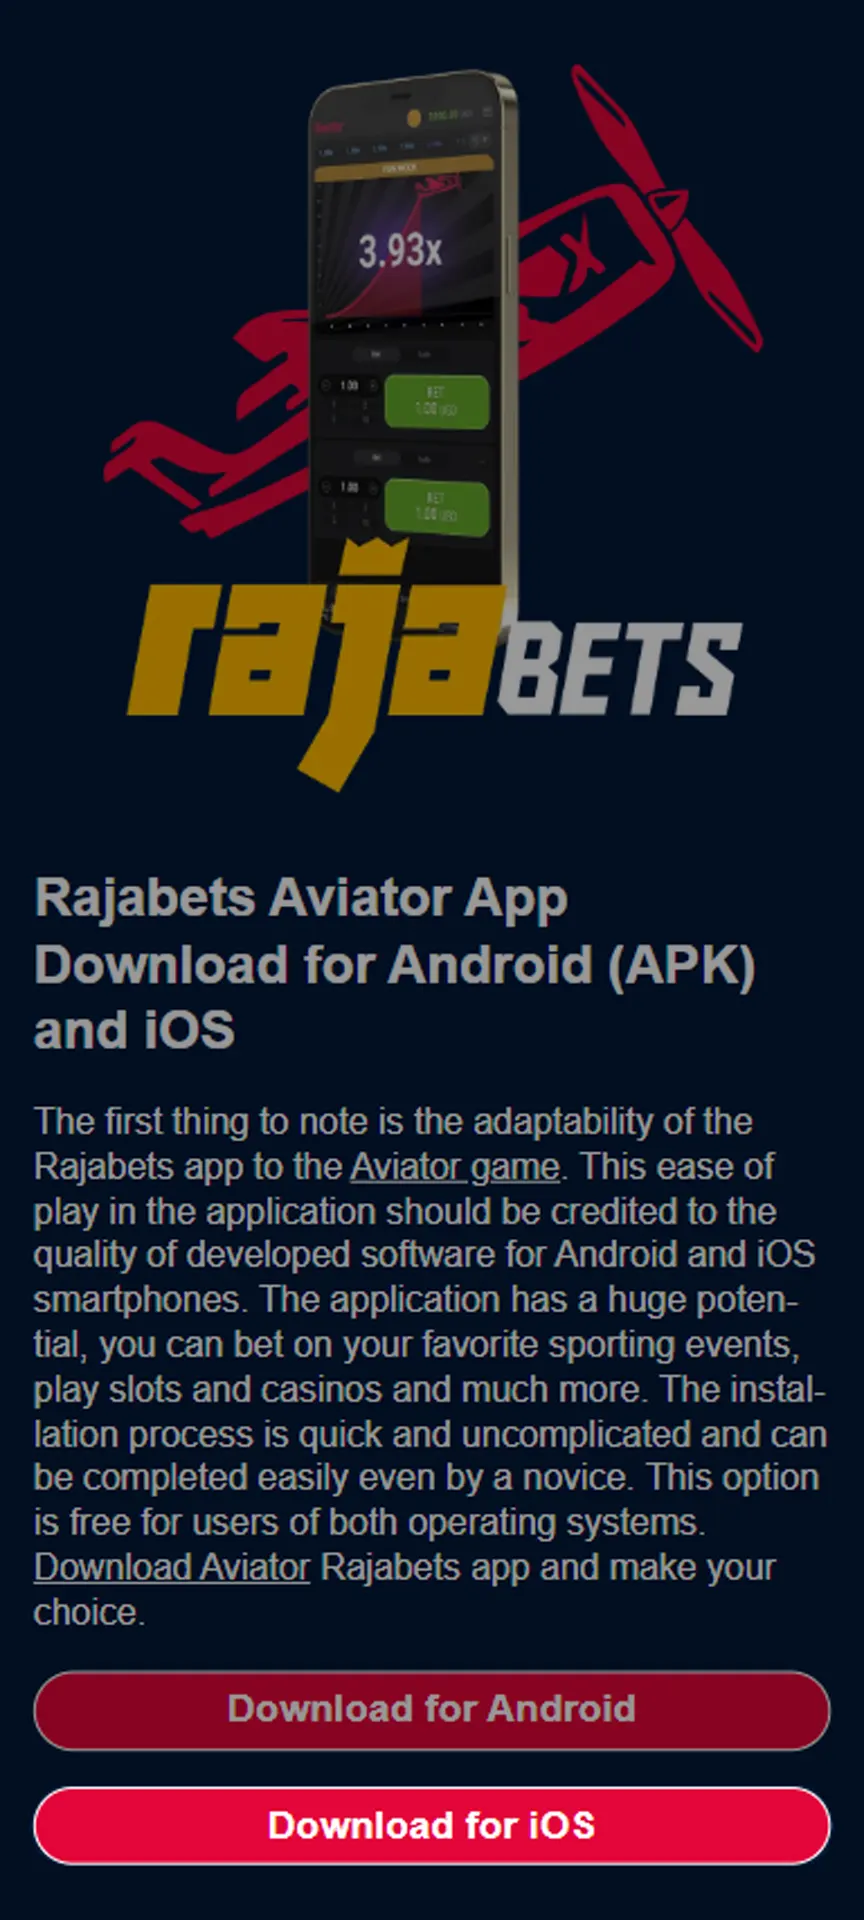 Enter on the Rajabets iOS app download page.